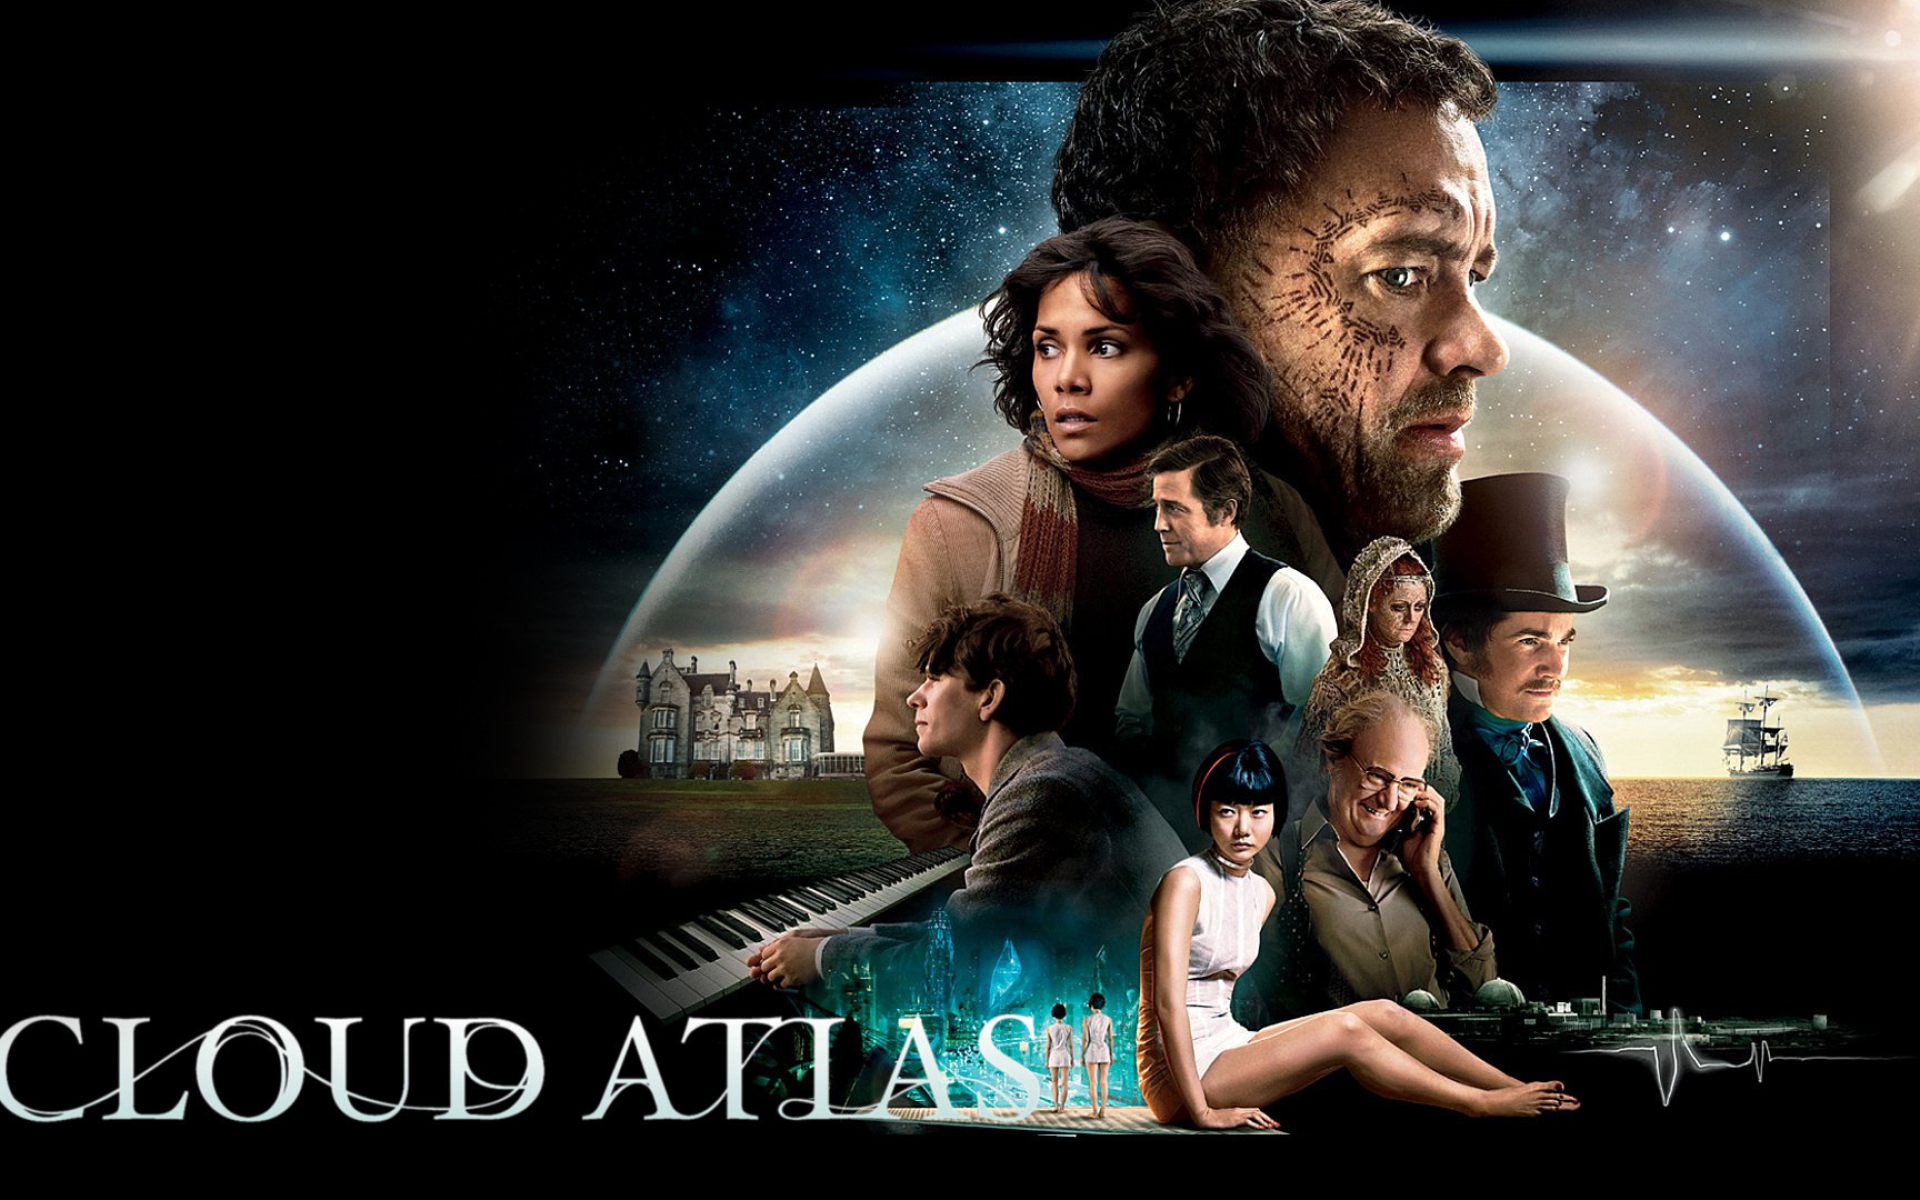 Cloud Atlas: The film was nominated for a Golden Globe Award for Best Original Score. 1920x1200 HD Wallpaper.